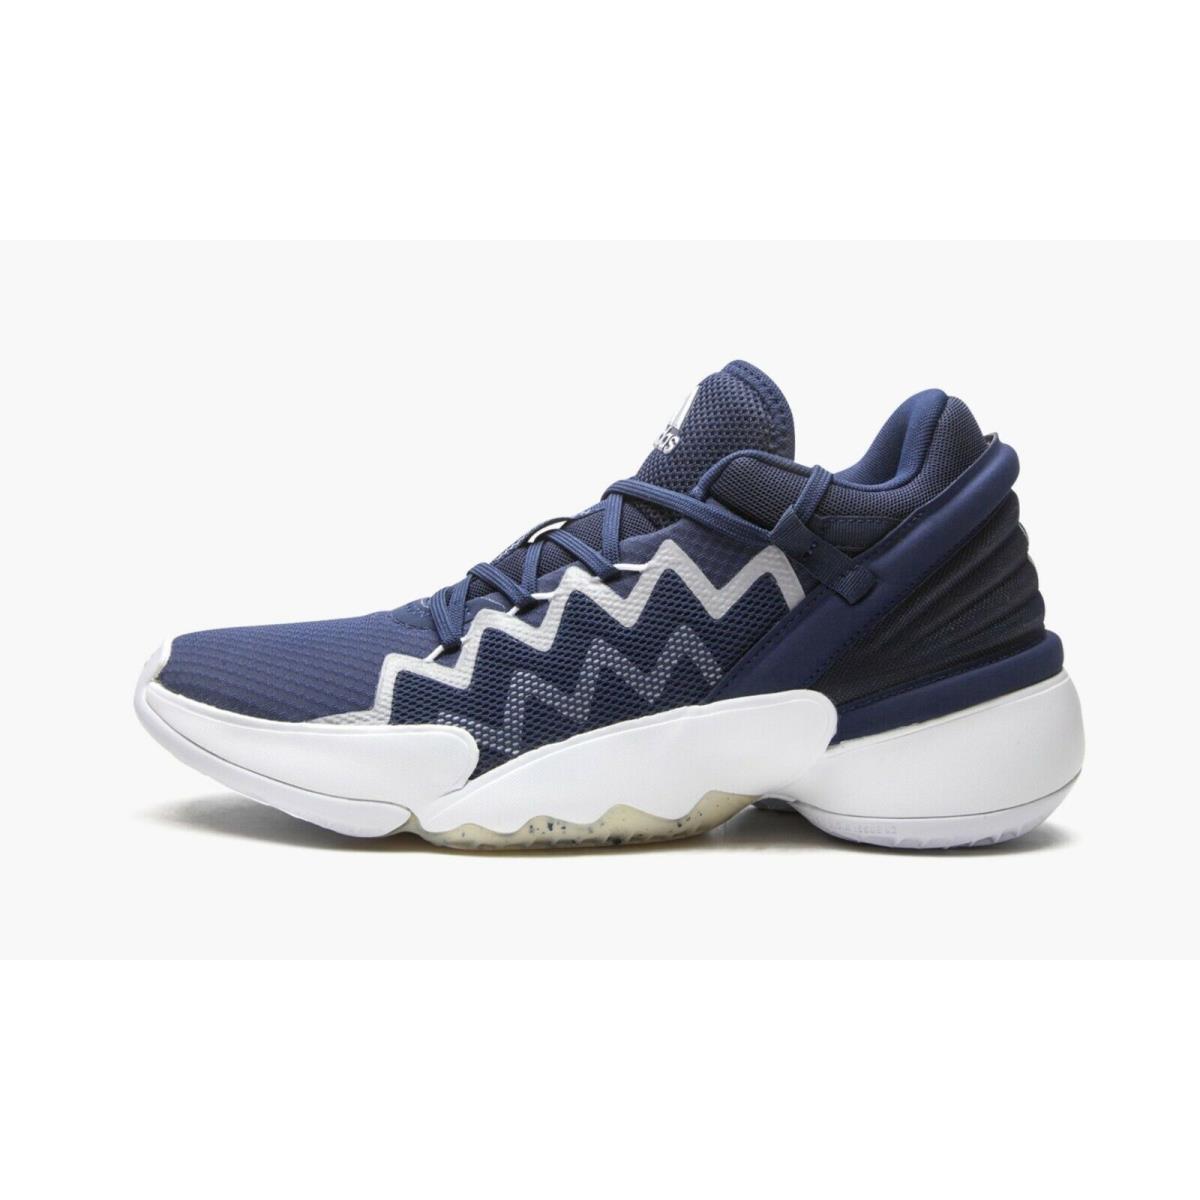 Adidas shoes Issue - NAVY/WHITE 8